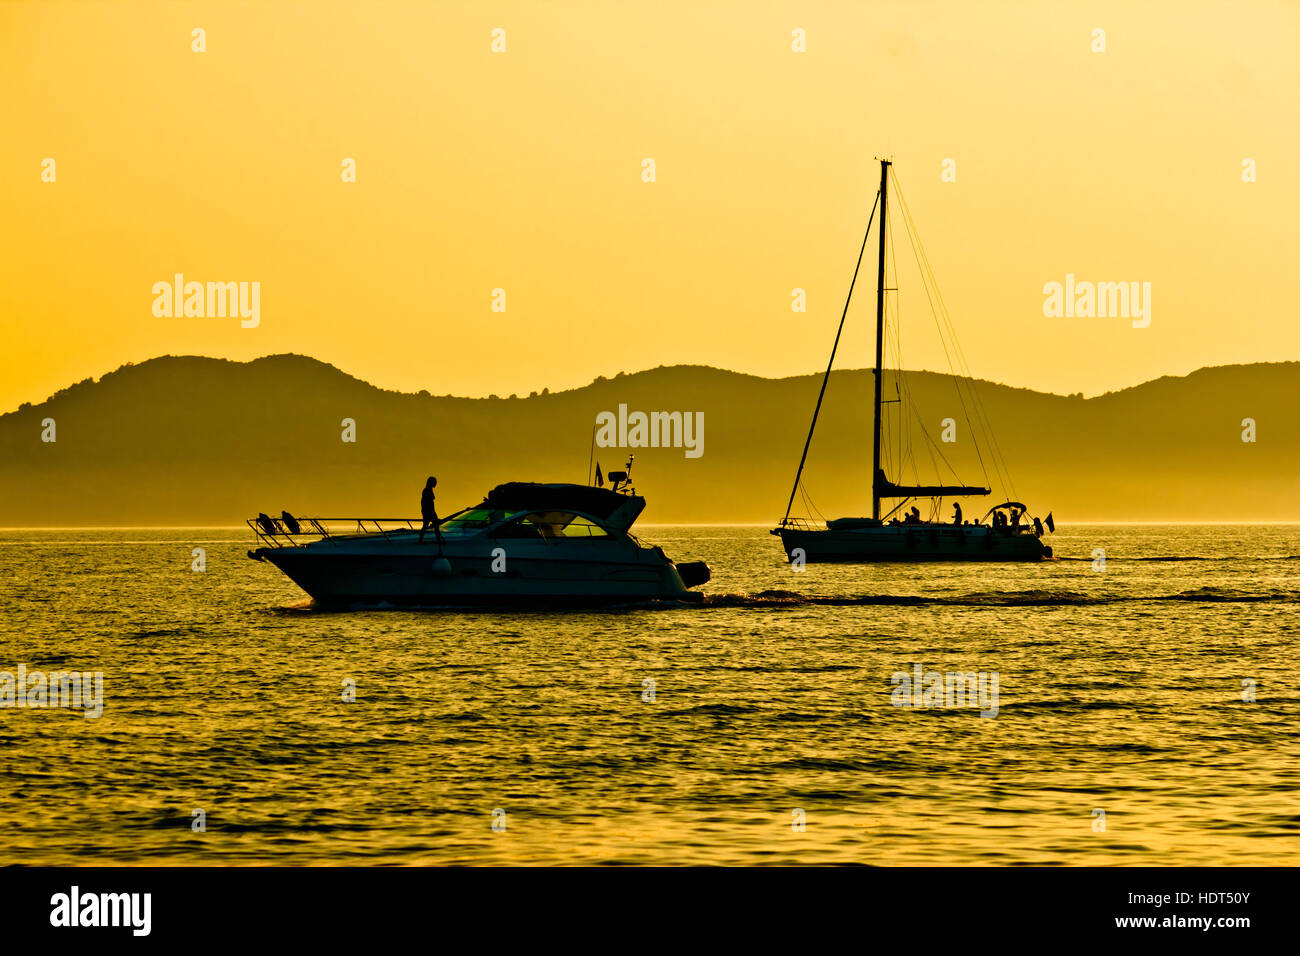 Yacht and sailboat silhouette at golden sunset view Stock Photo